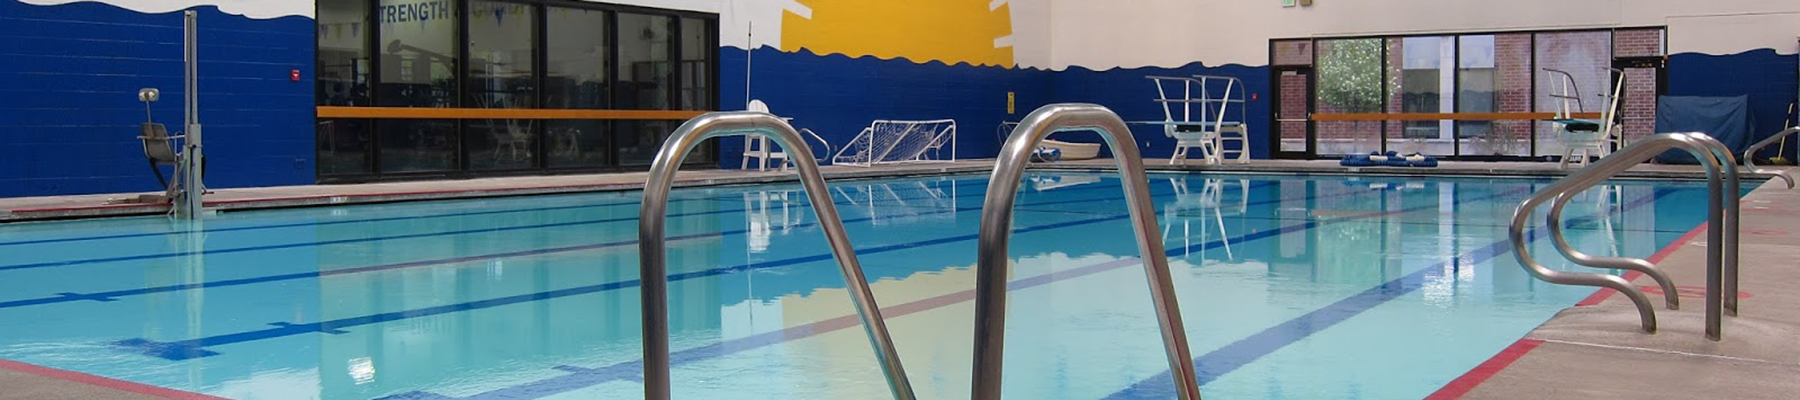 SCC Swimming Pool With Lanes